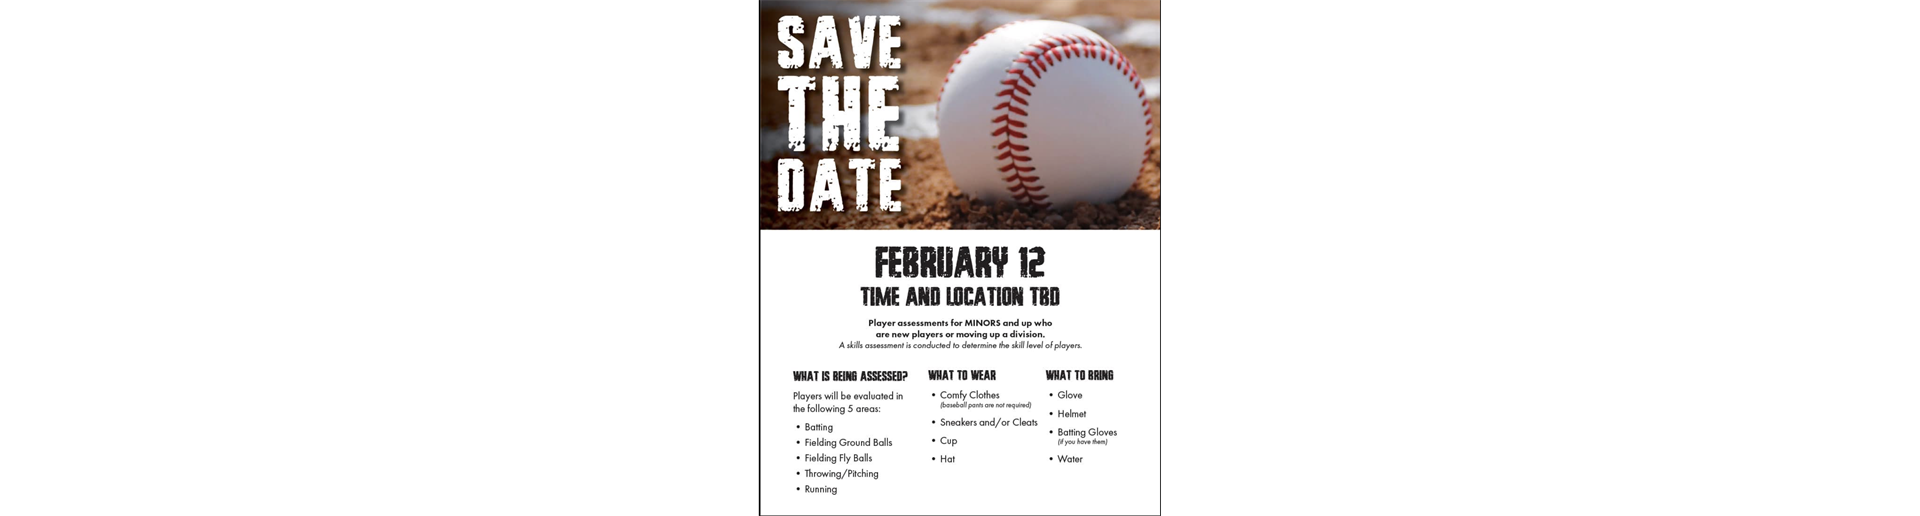 Player Evaluations Save the Date